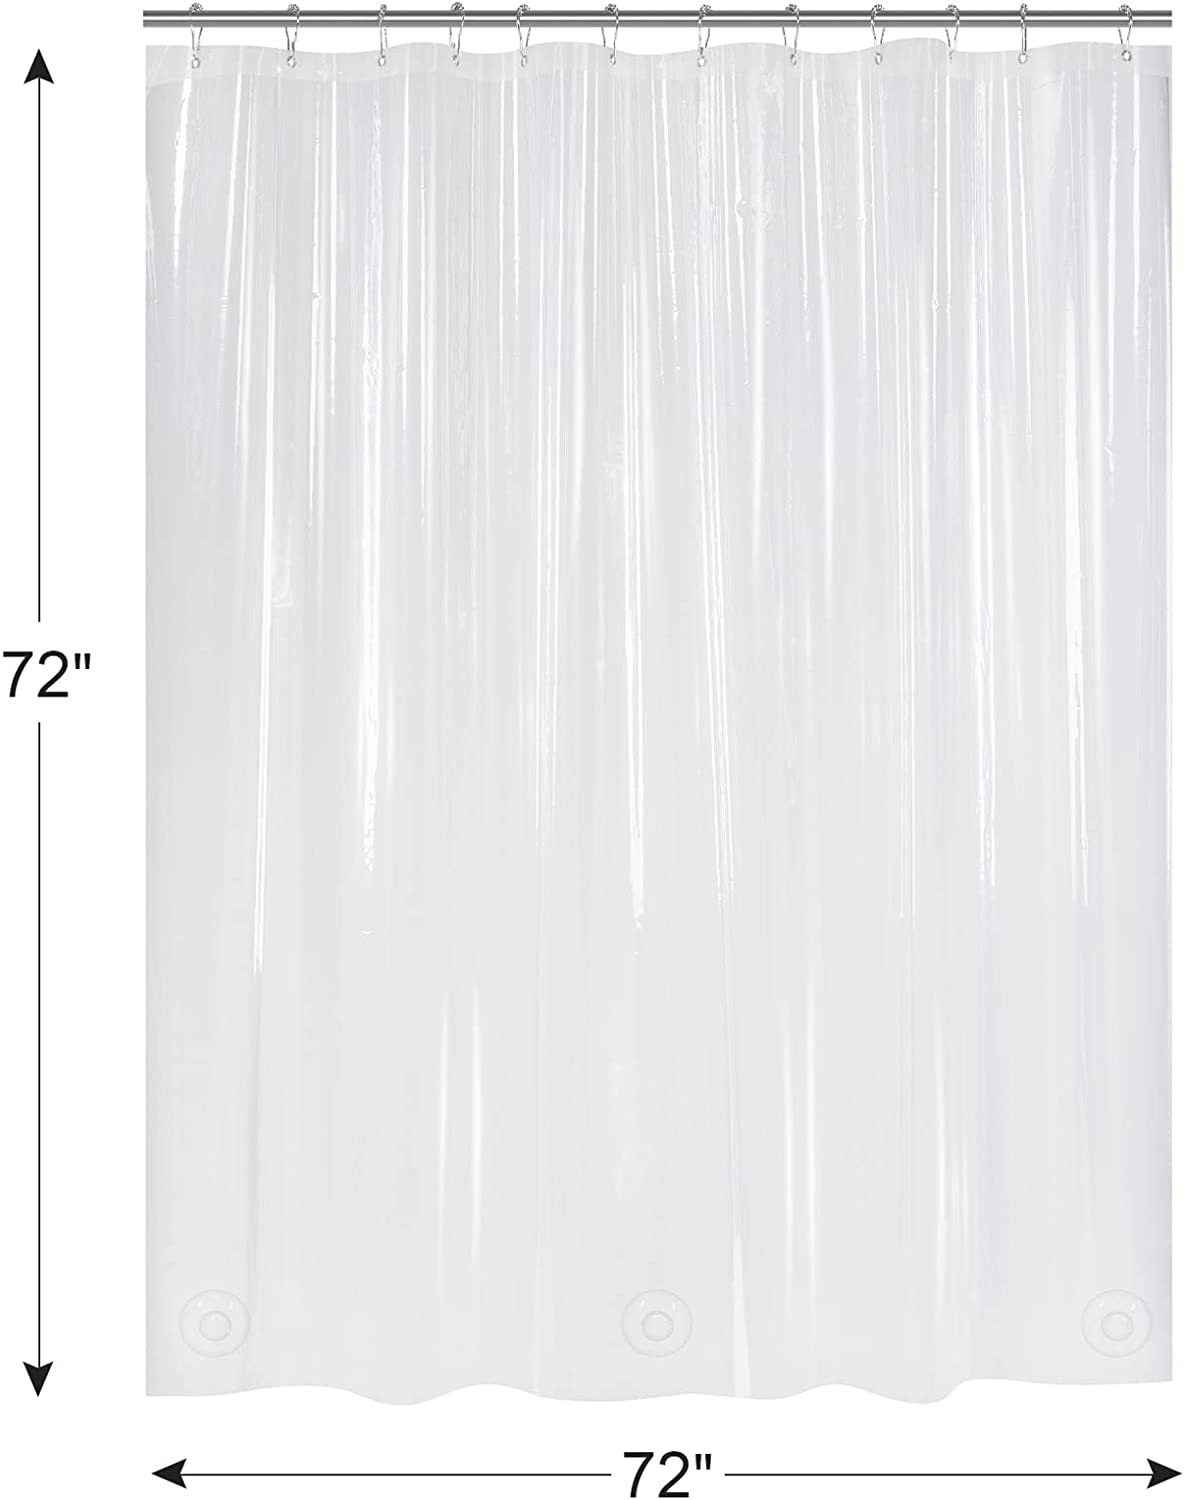 AmazerBath 8G EVA Plastic Shower Curtain Line with Clear Weights and Rustproof Grommet Holes